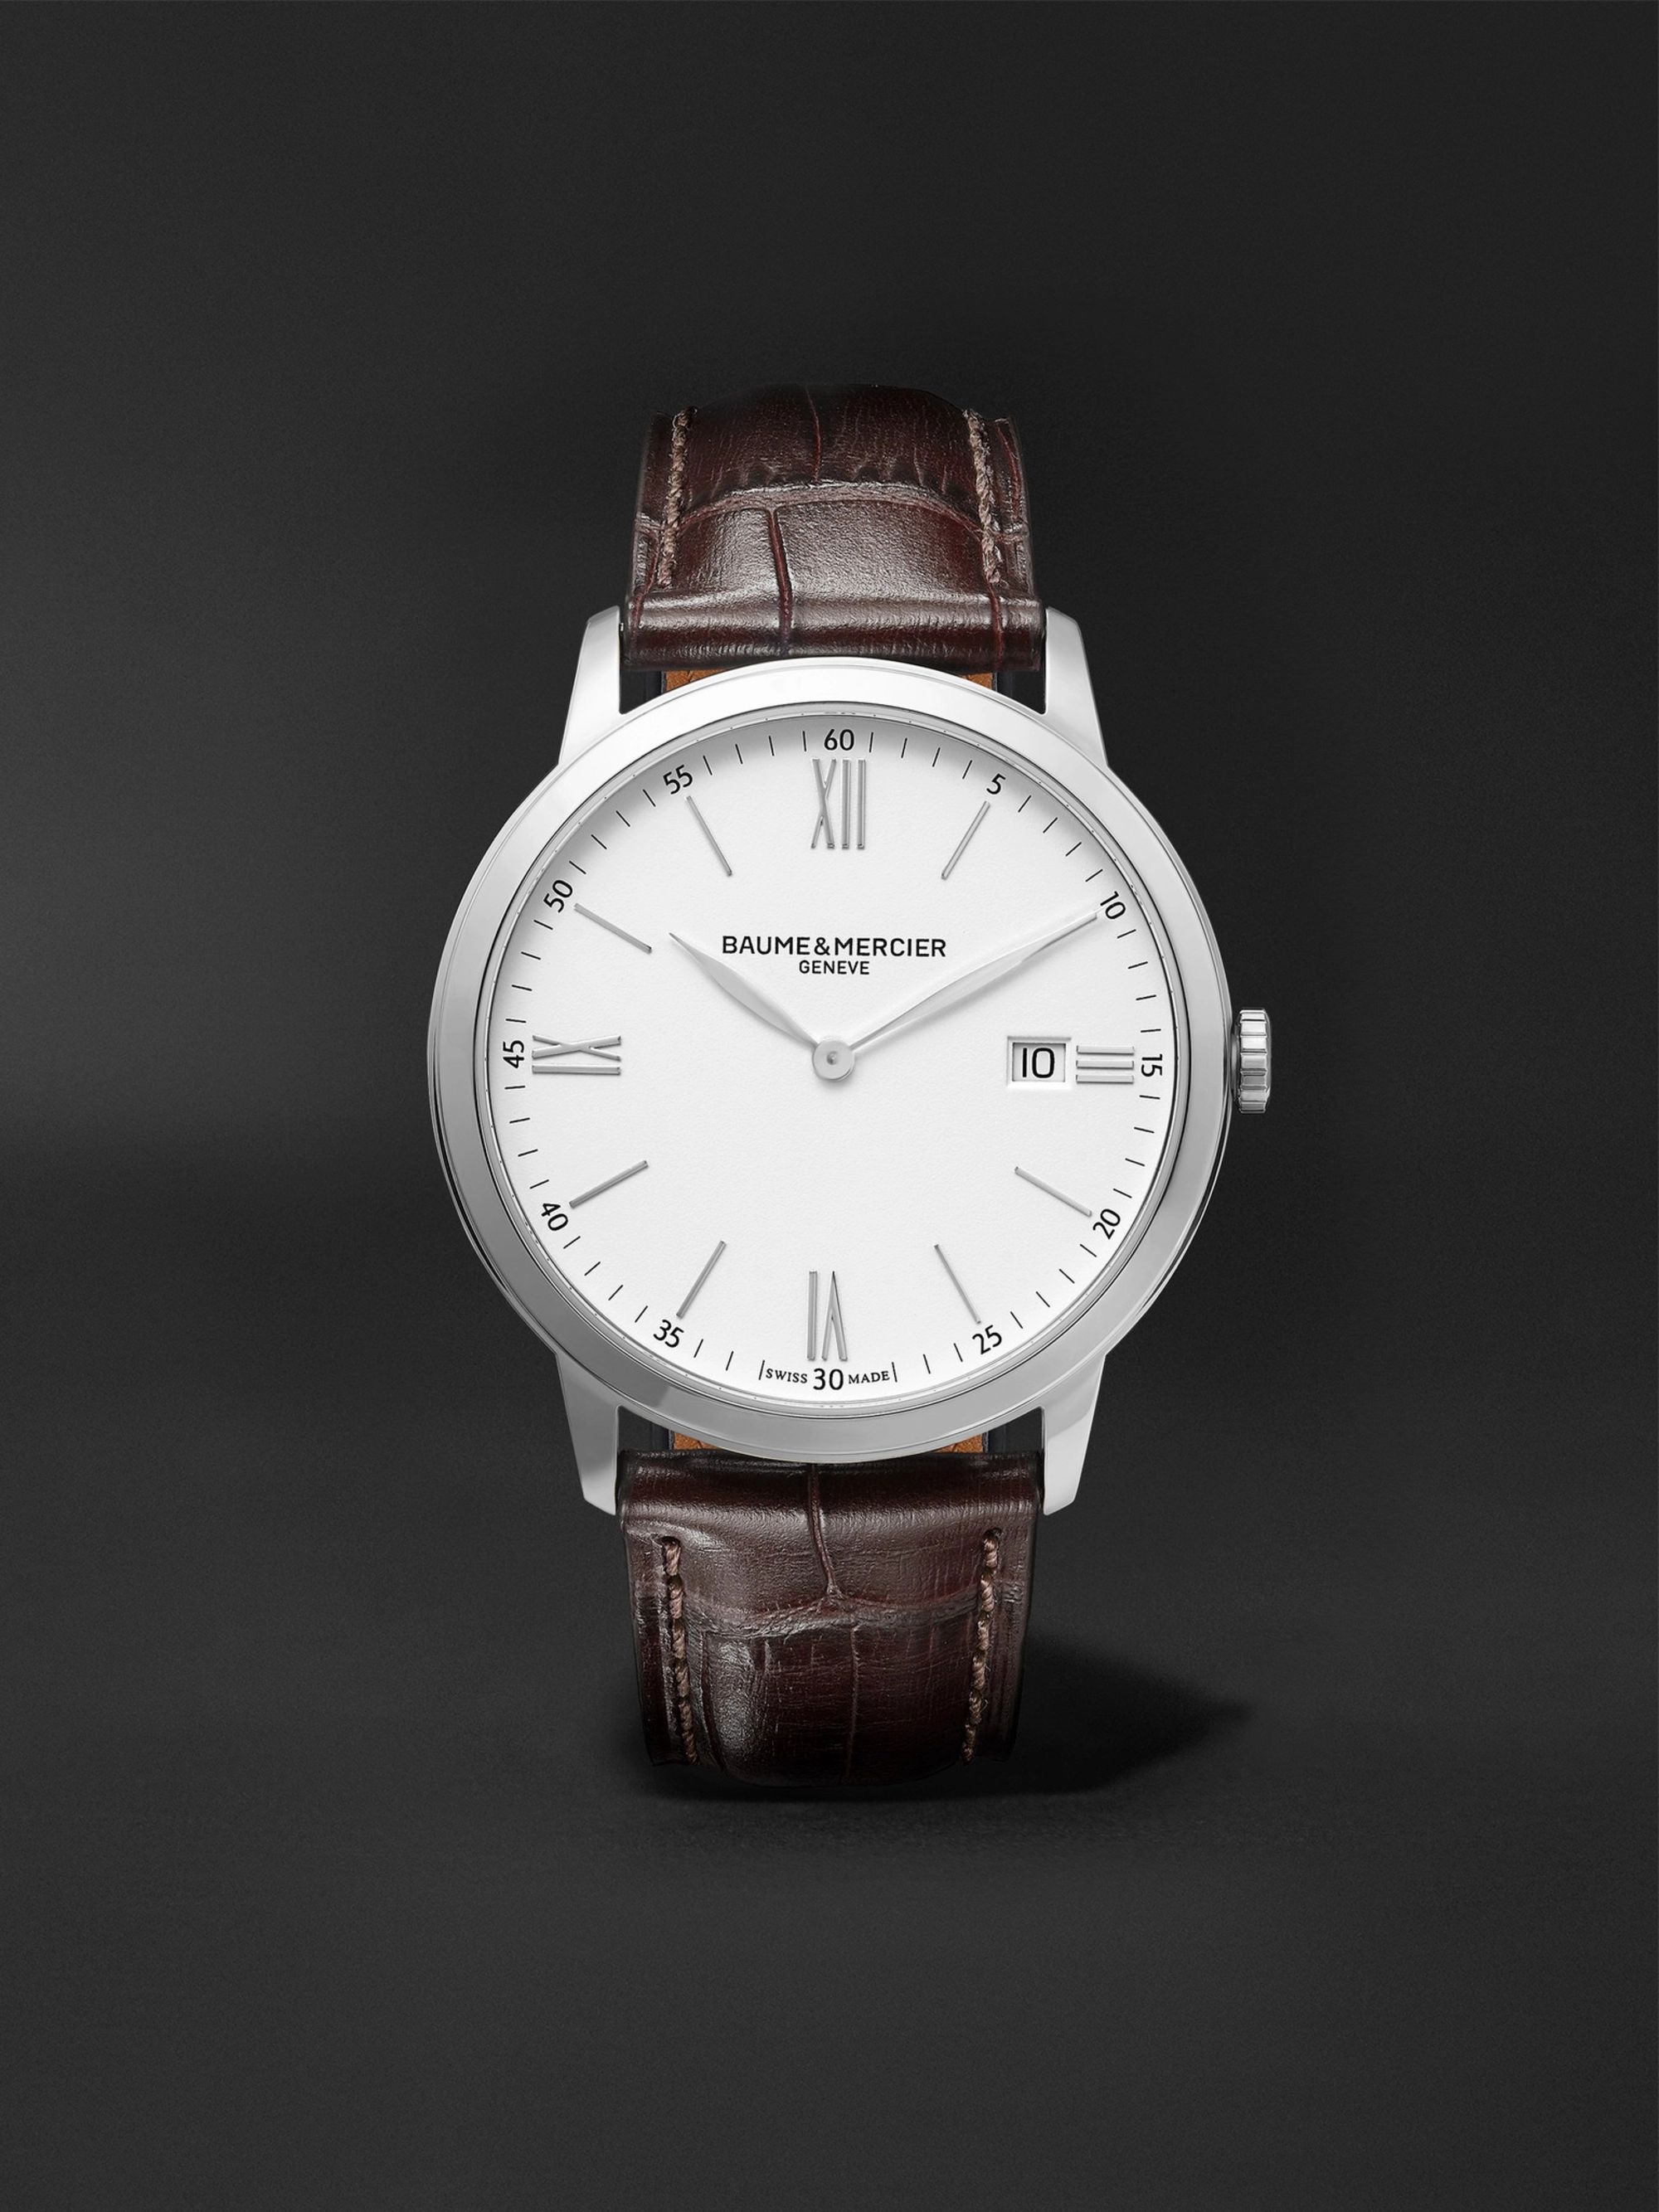 BAUME & MERCIER Classima 40mm Steel and Croc-Effect Leather Watch, Ref. No. 10507